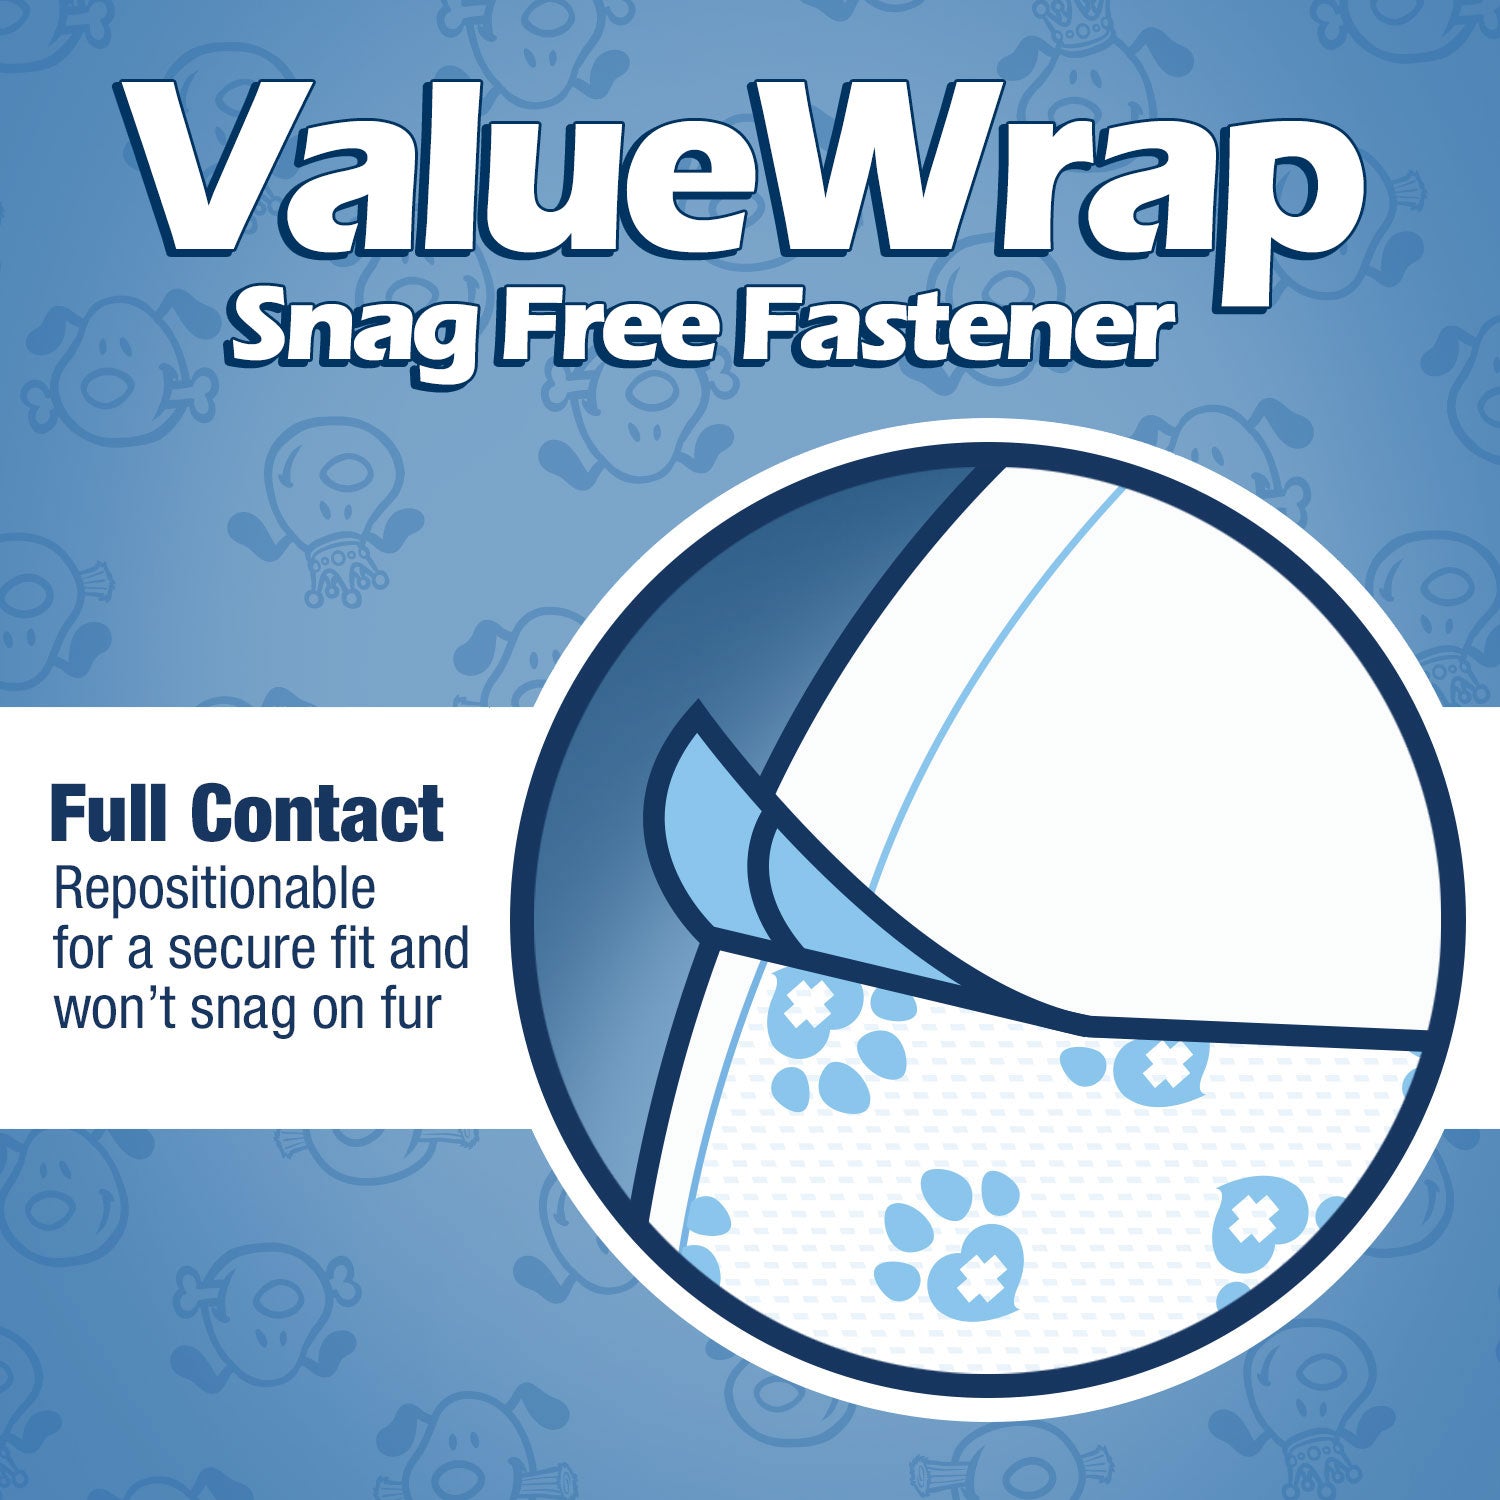 NEW- ValueWrap Male Wraps, Disposable Dog Diapers, 1-Tab Medium, Lavender, 576 Count WHOLESALE PACK